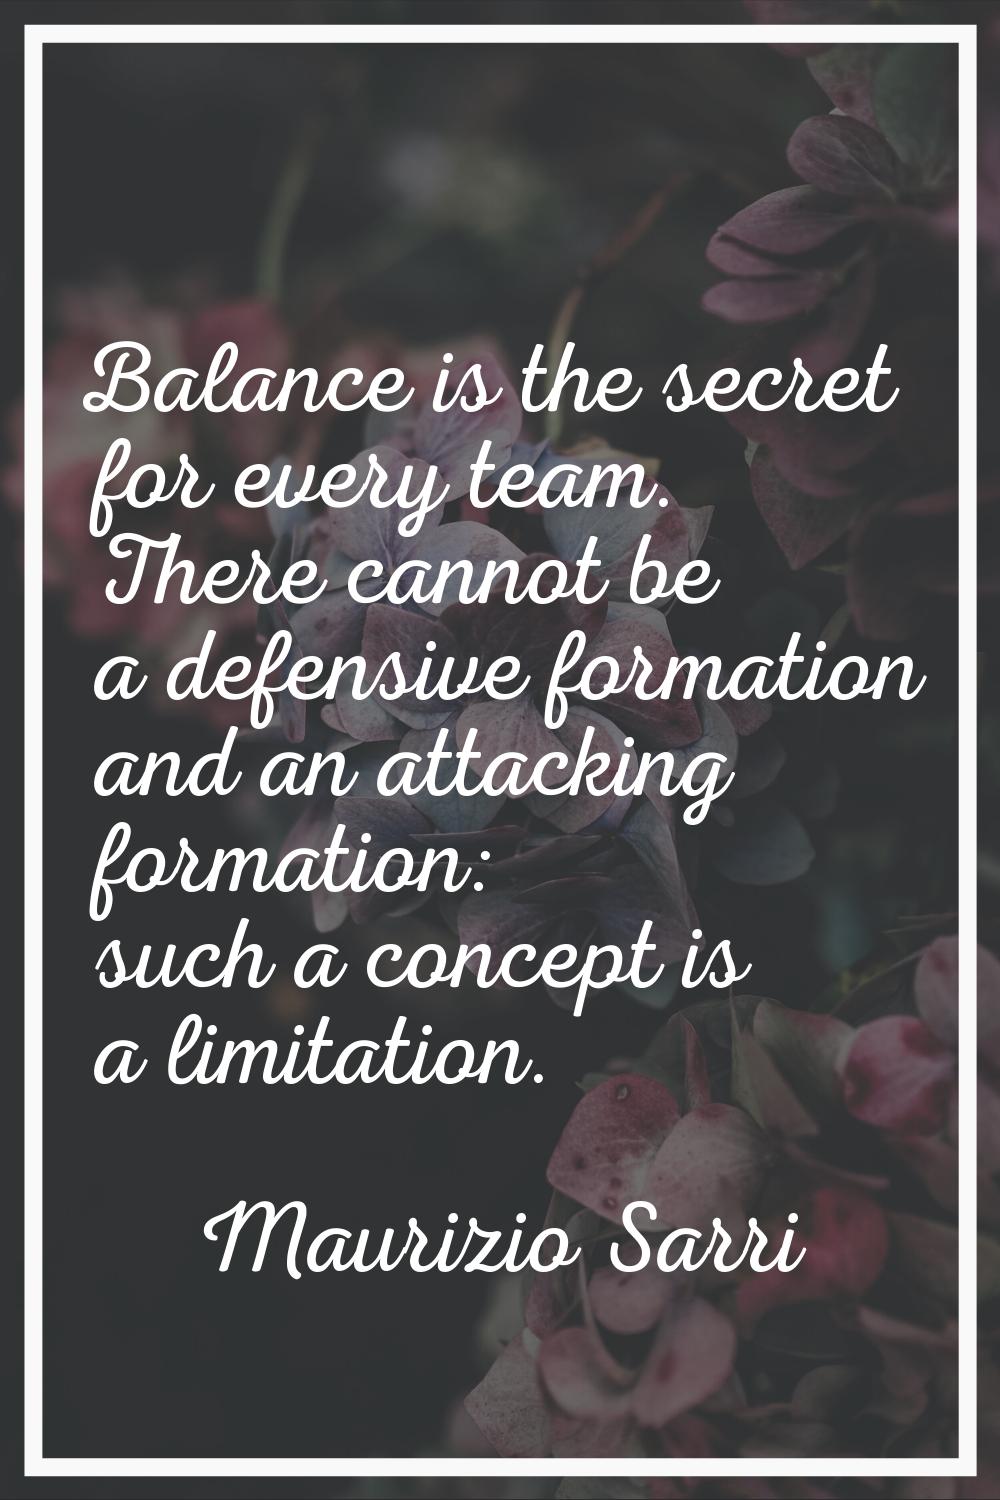 Balance is the secret for every team. There cannot be a defensive formation and an attacking format